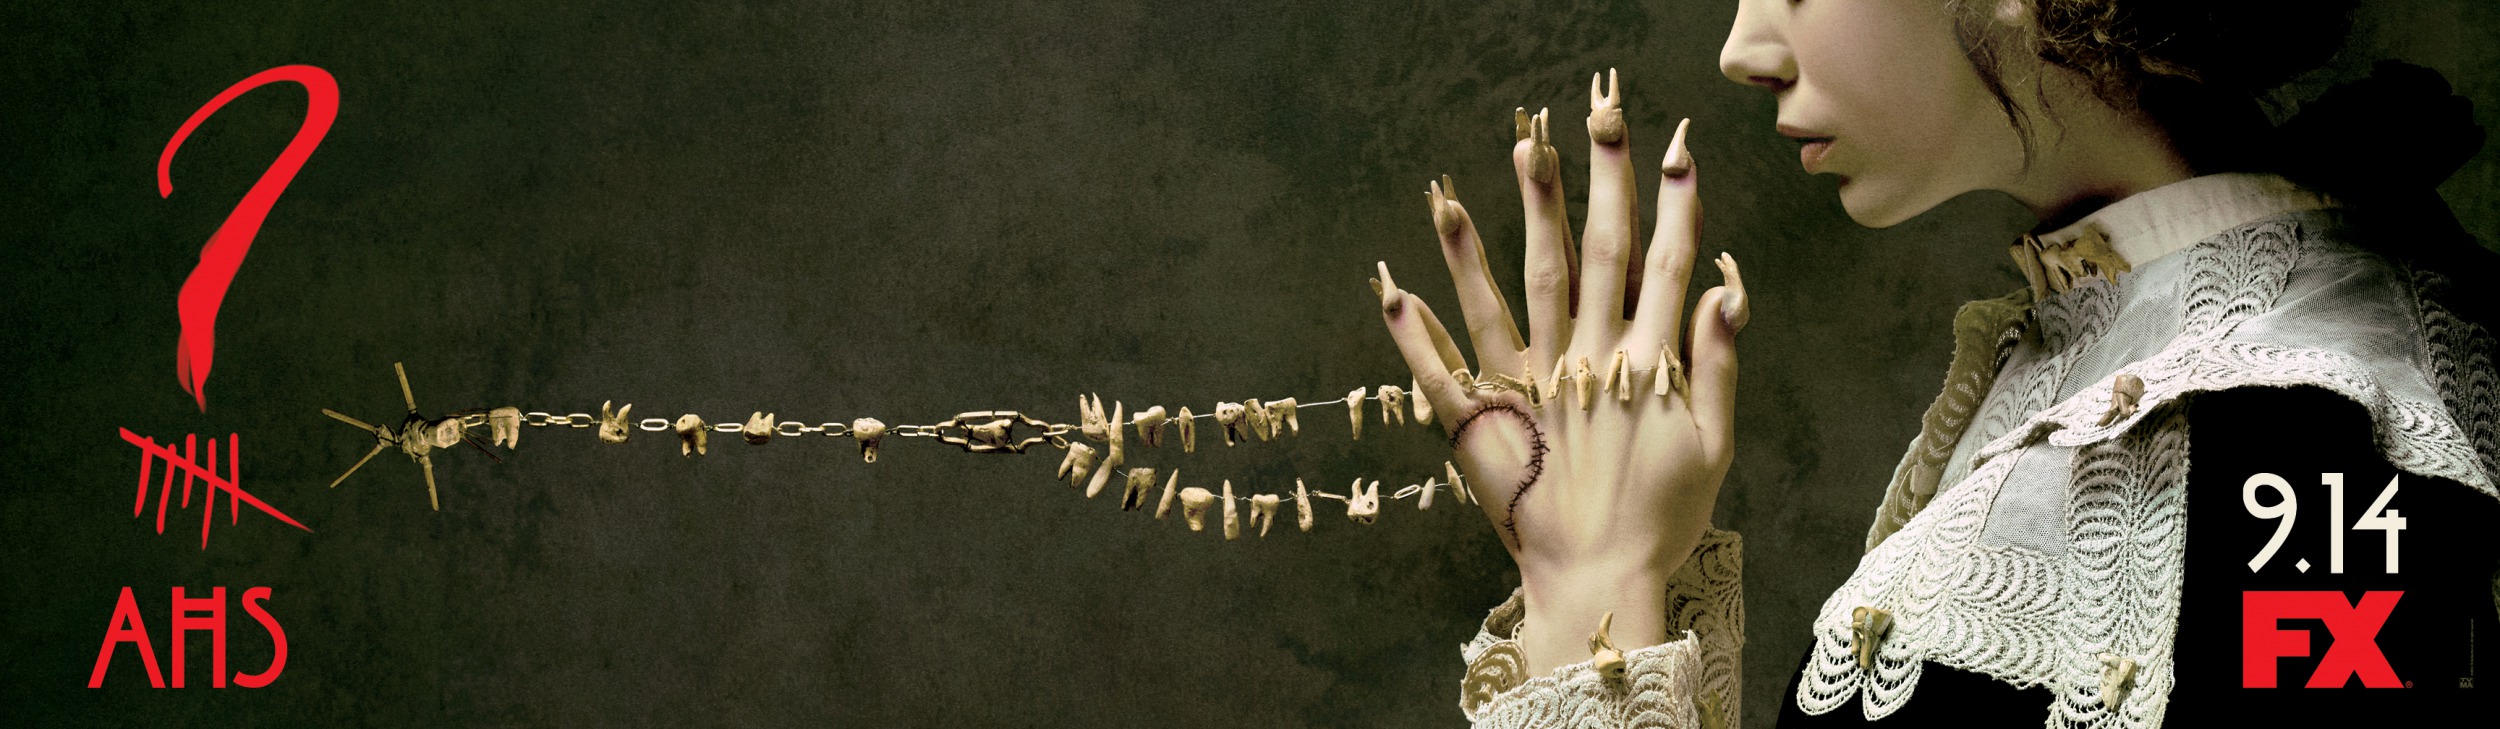 Mega Sized Movie Poster Image for American Horror Story (#63 of 133)